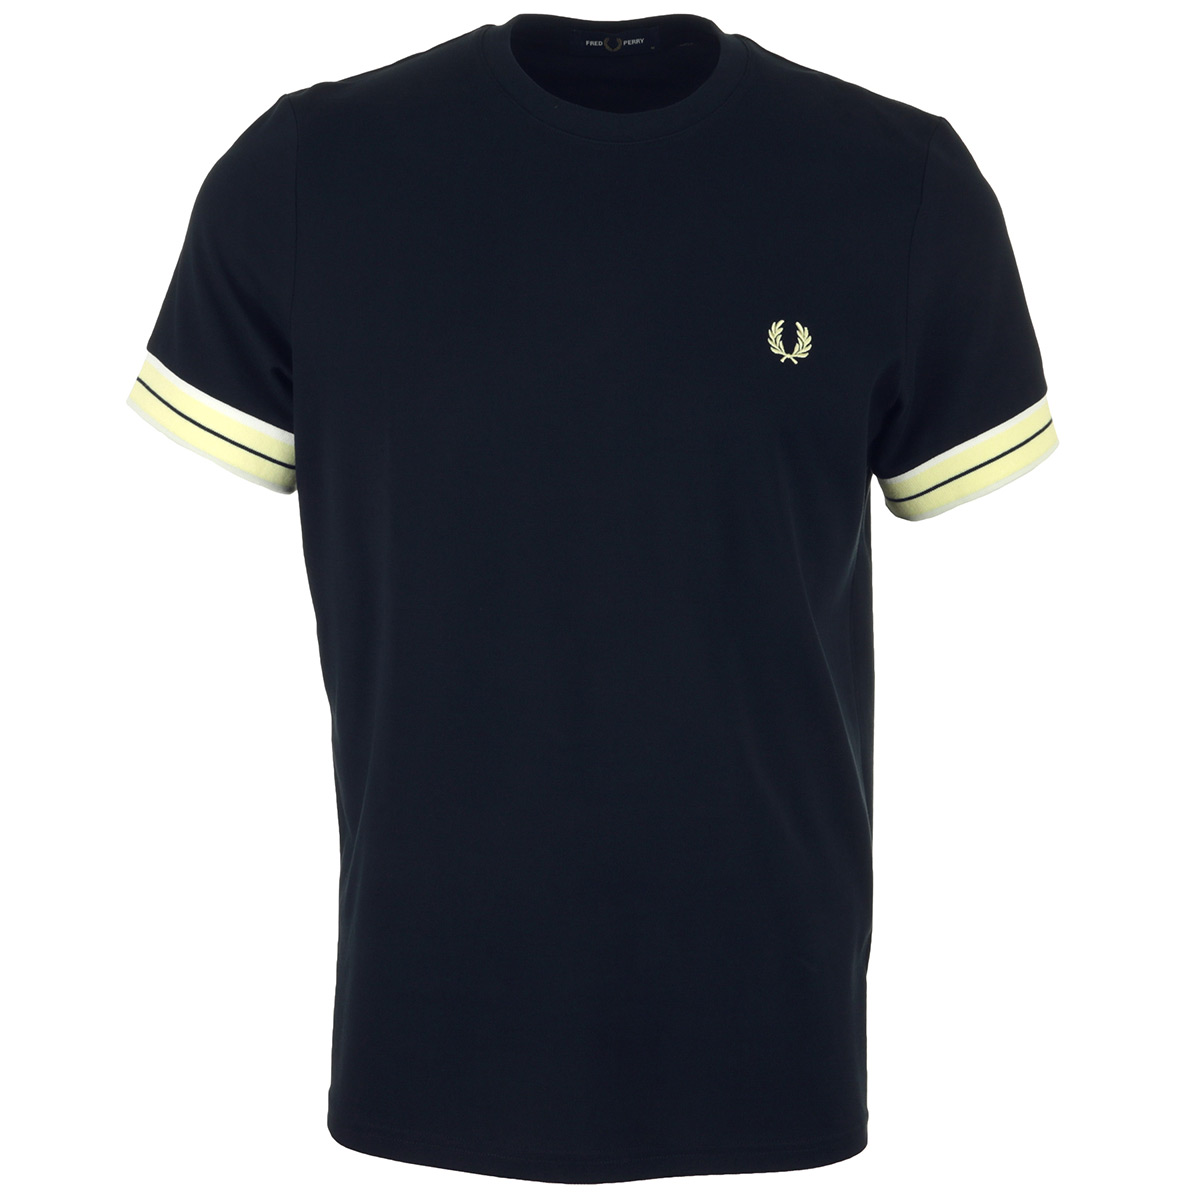 Fred Perry "Tramline Tipped Pique T-Shirt"